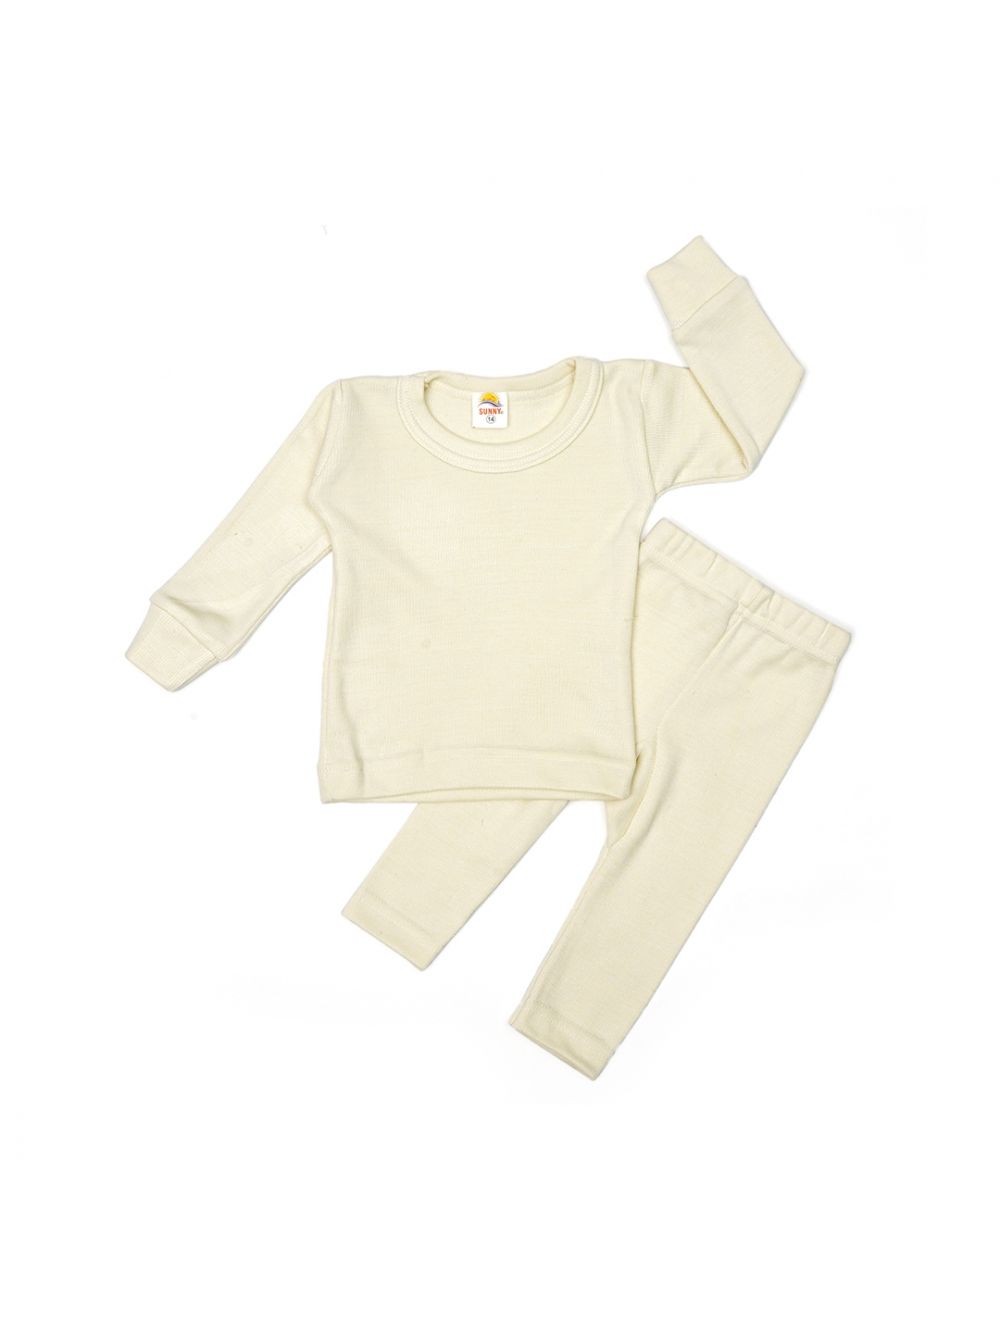 Little Sparks Baby Wear Set Yellow